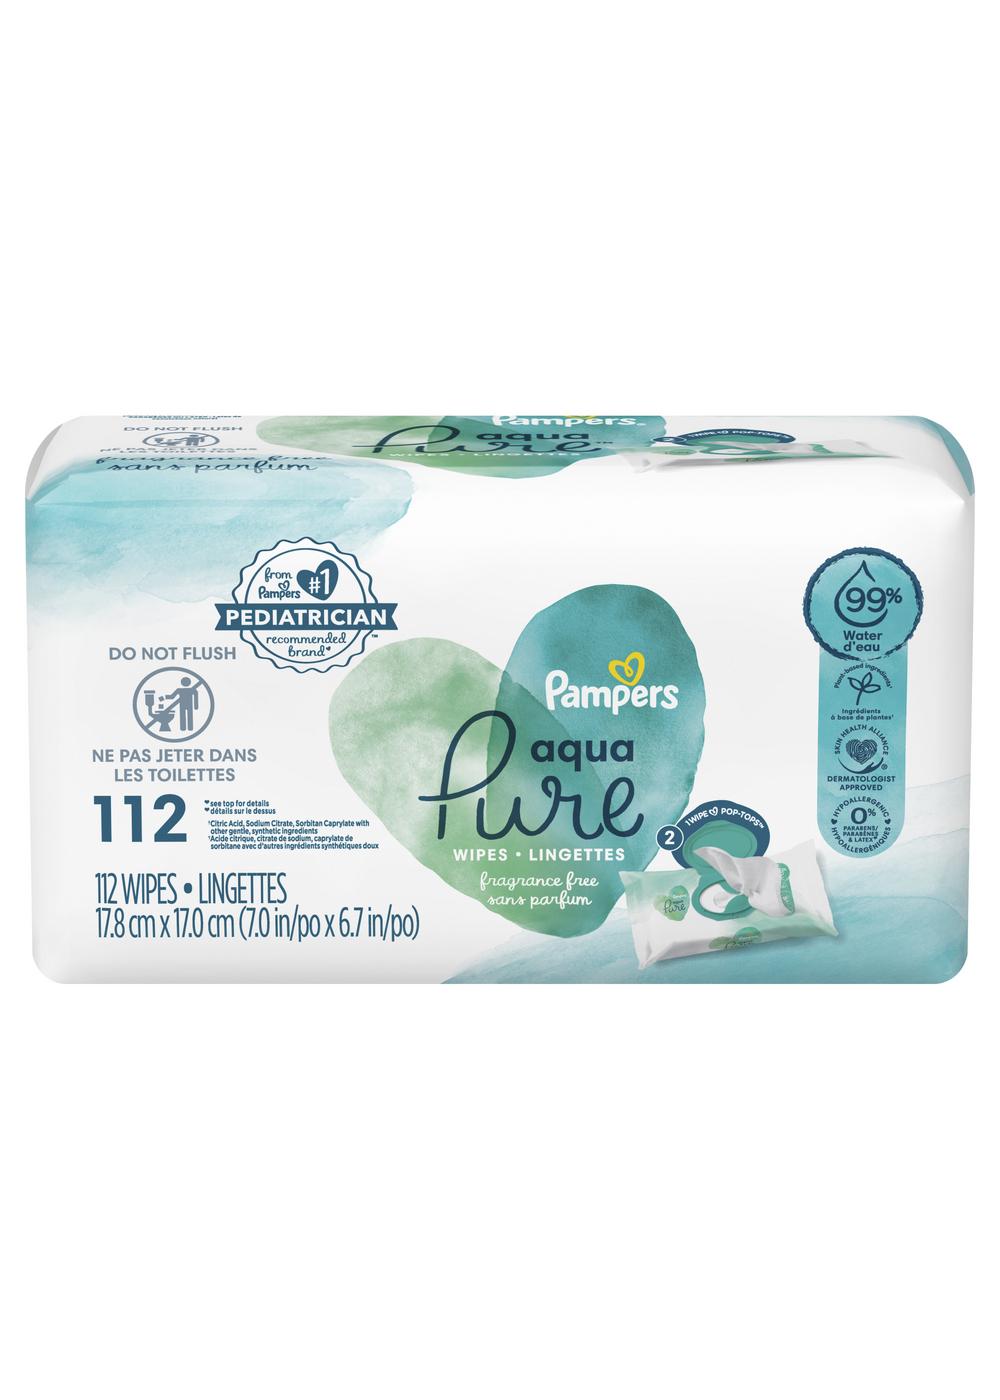 Pampers Aqua Pure Baby Wipes 2 Pk; image 1 of 9